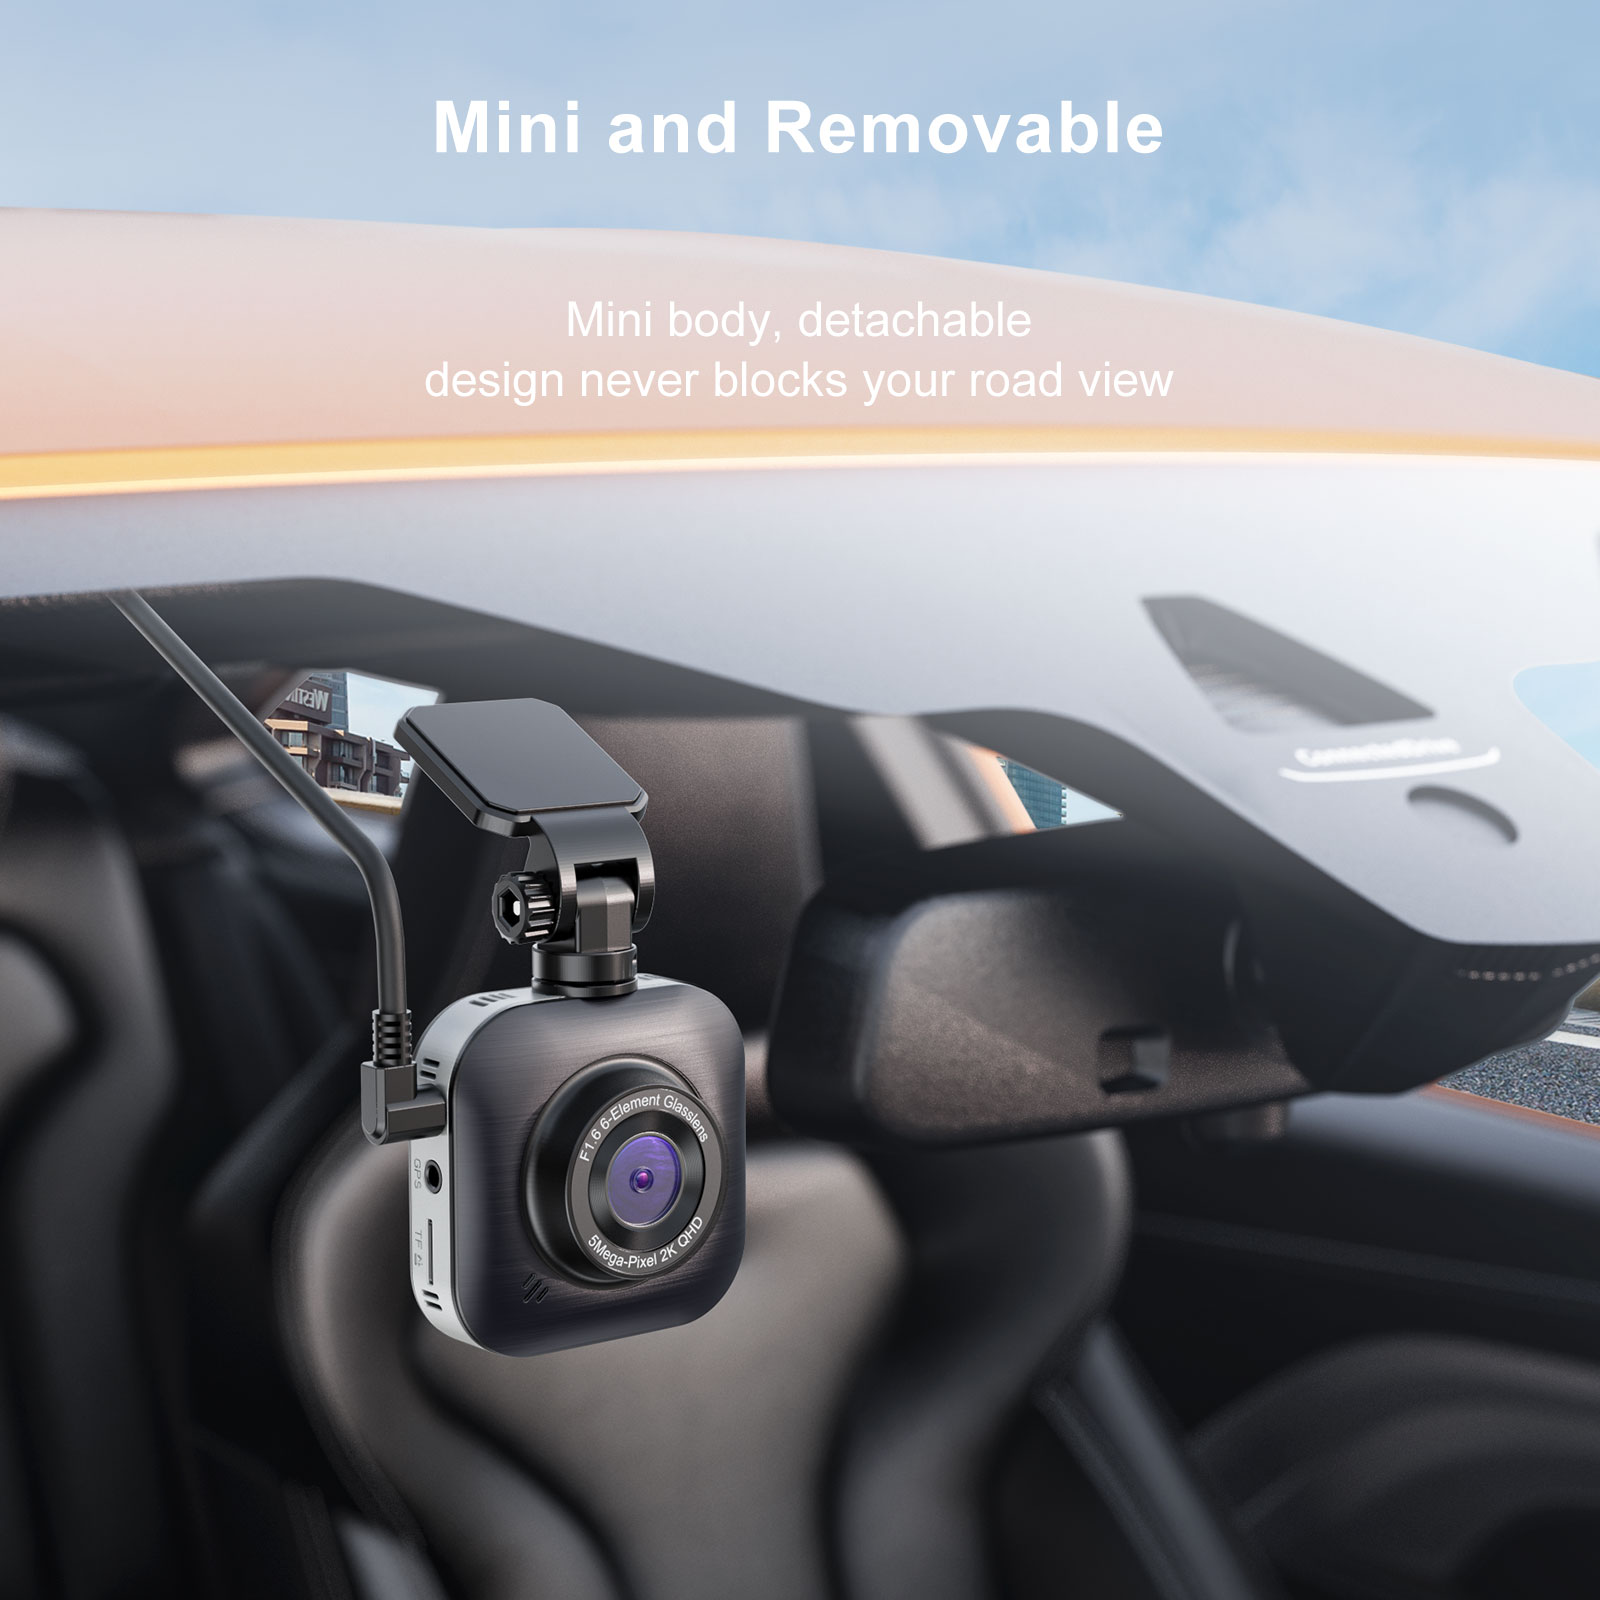 2560x1440P HD 150° Wide Angle Car Dash Camera Loop Recording Spedal 2K Mini Dash Cam F1.6 Aperture Record Ultra Clear Night Vision G-Sensor with 32GB Micro SD Card Motion Detection 